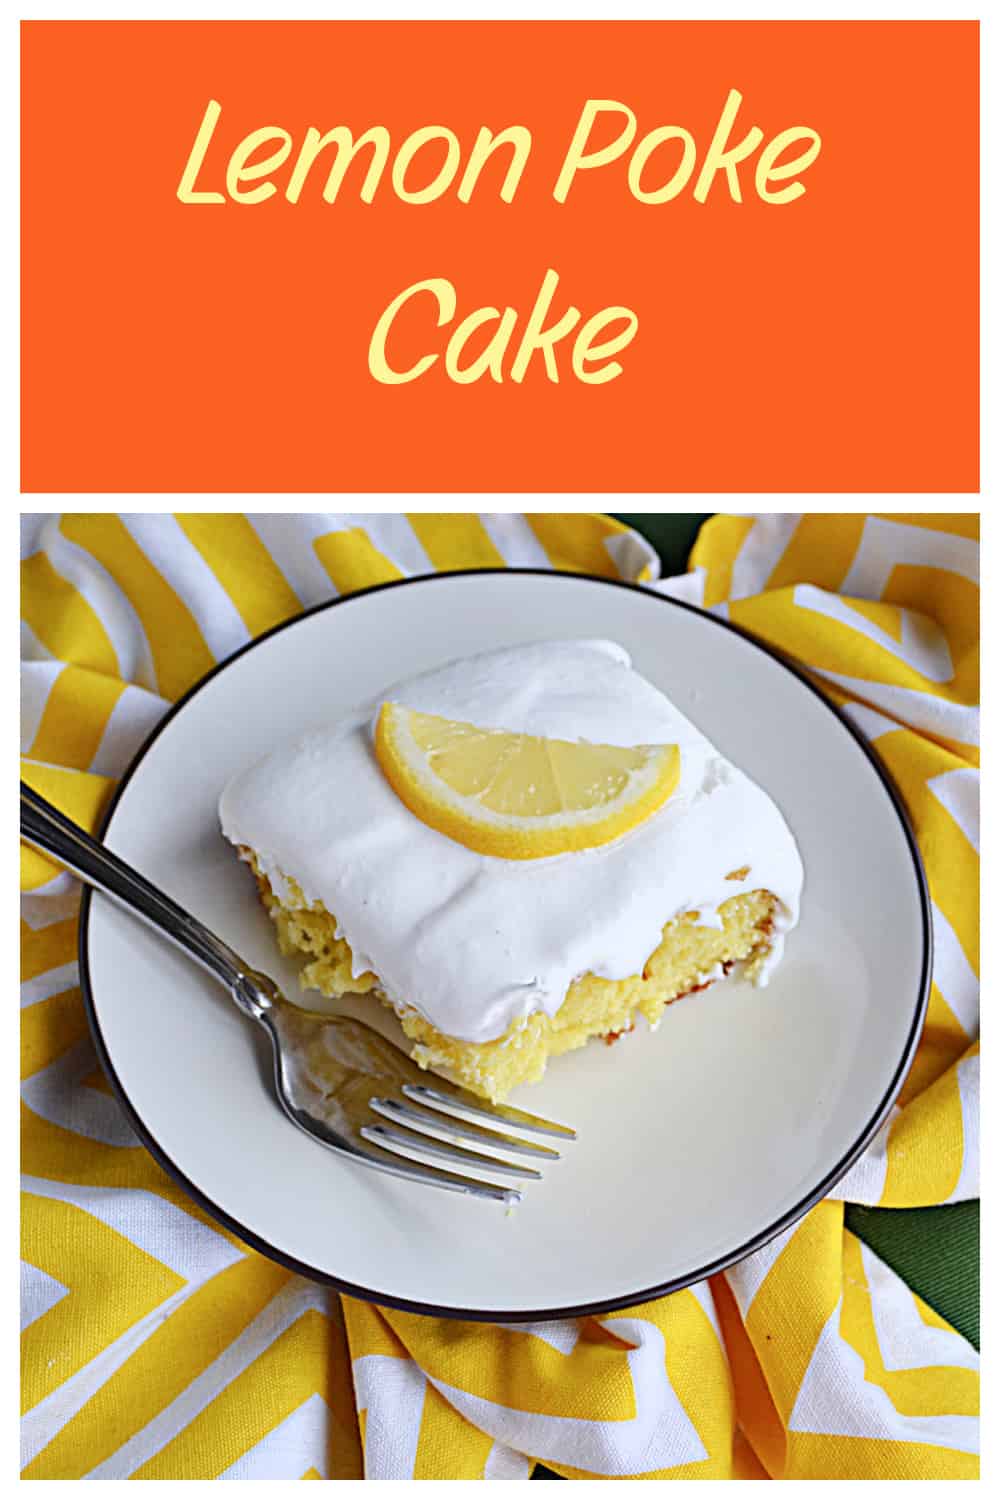 Pin Image: Text title, a plate with a slice of lemon cake and a fork next to it.